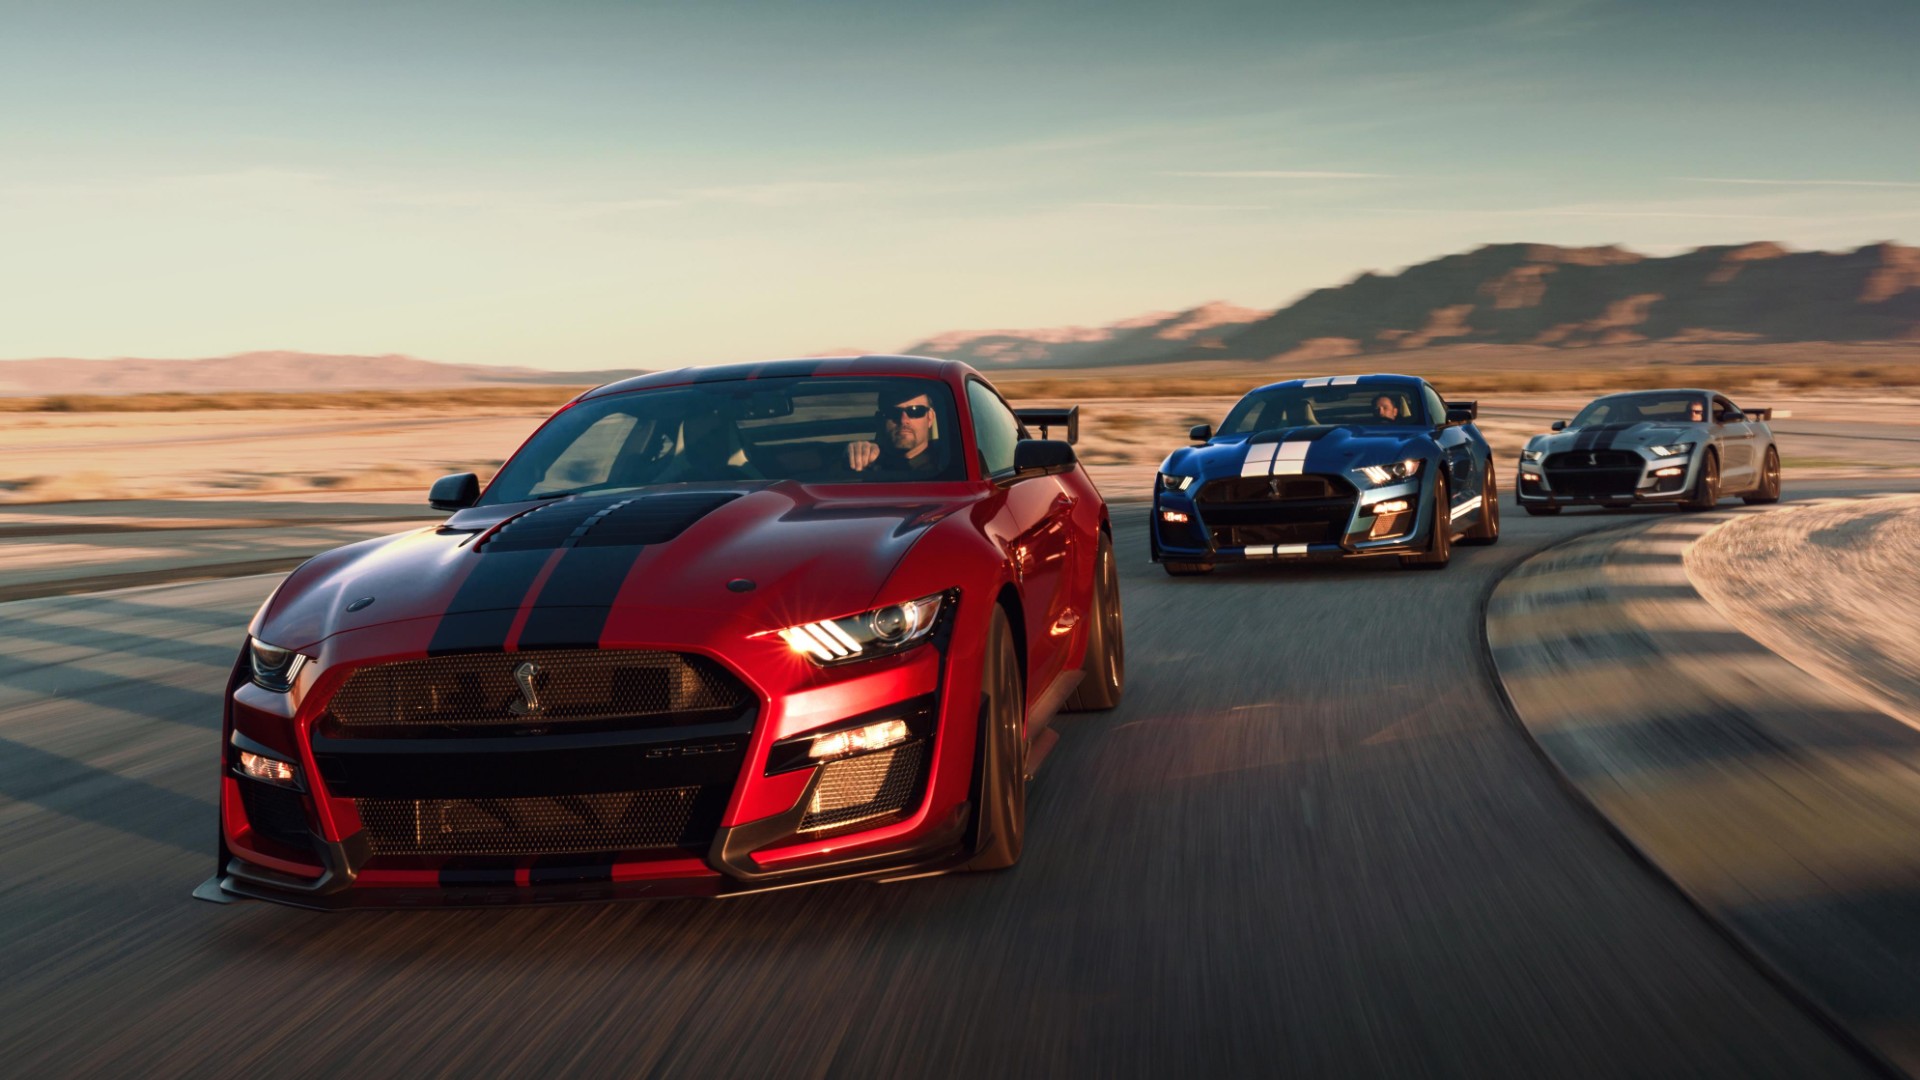 Shelby Mustang GT500 power revealed